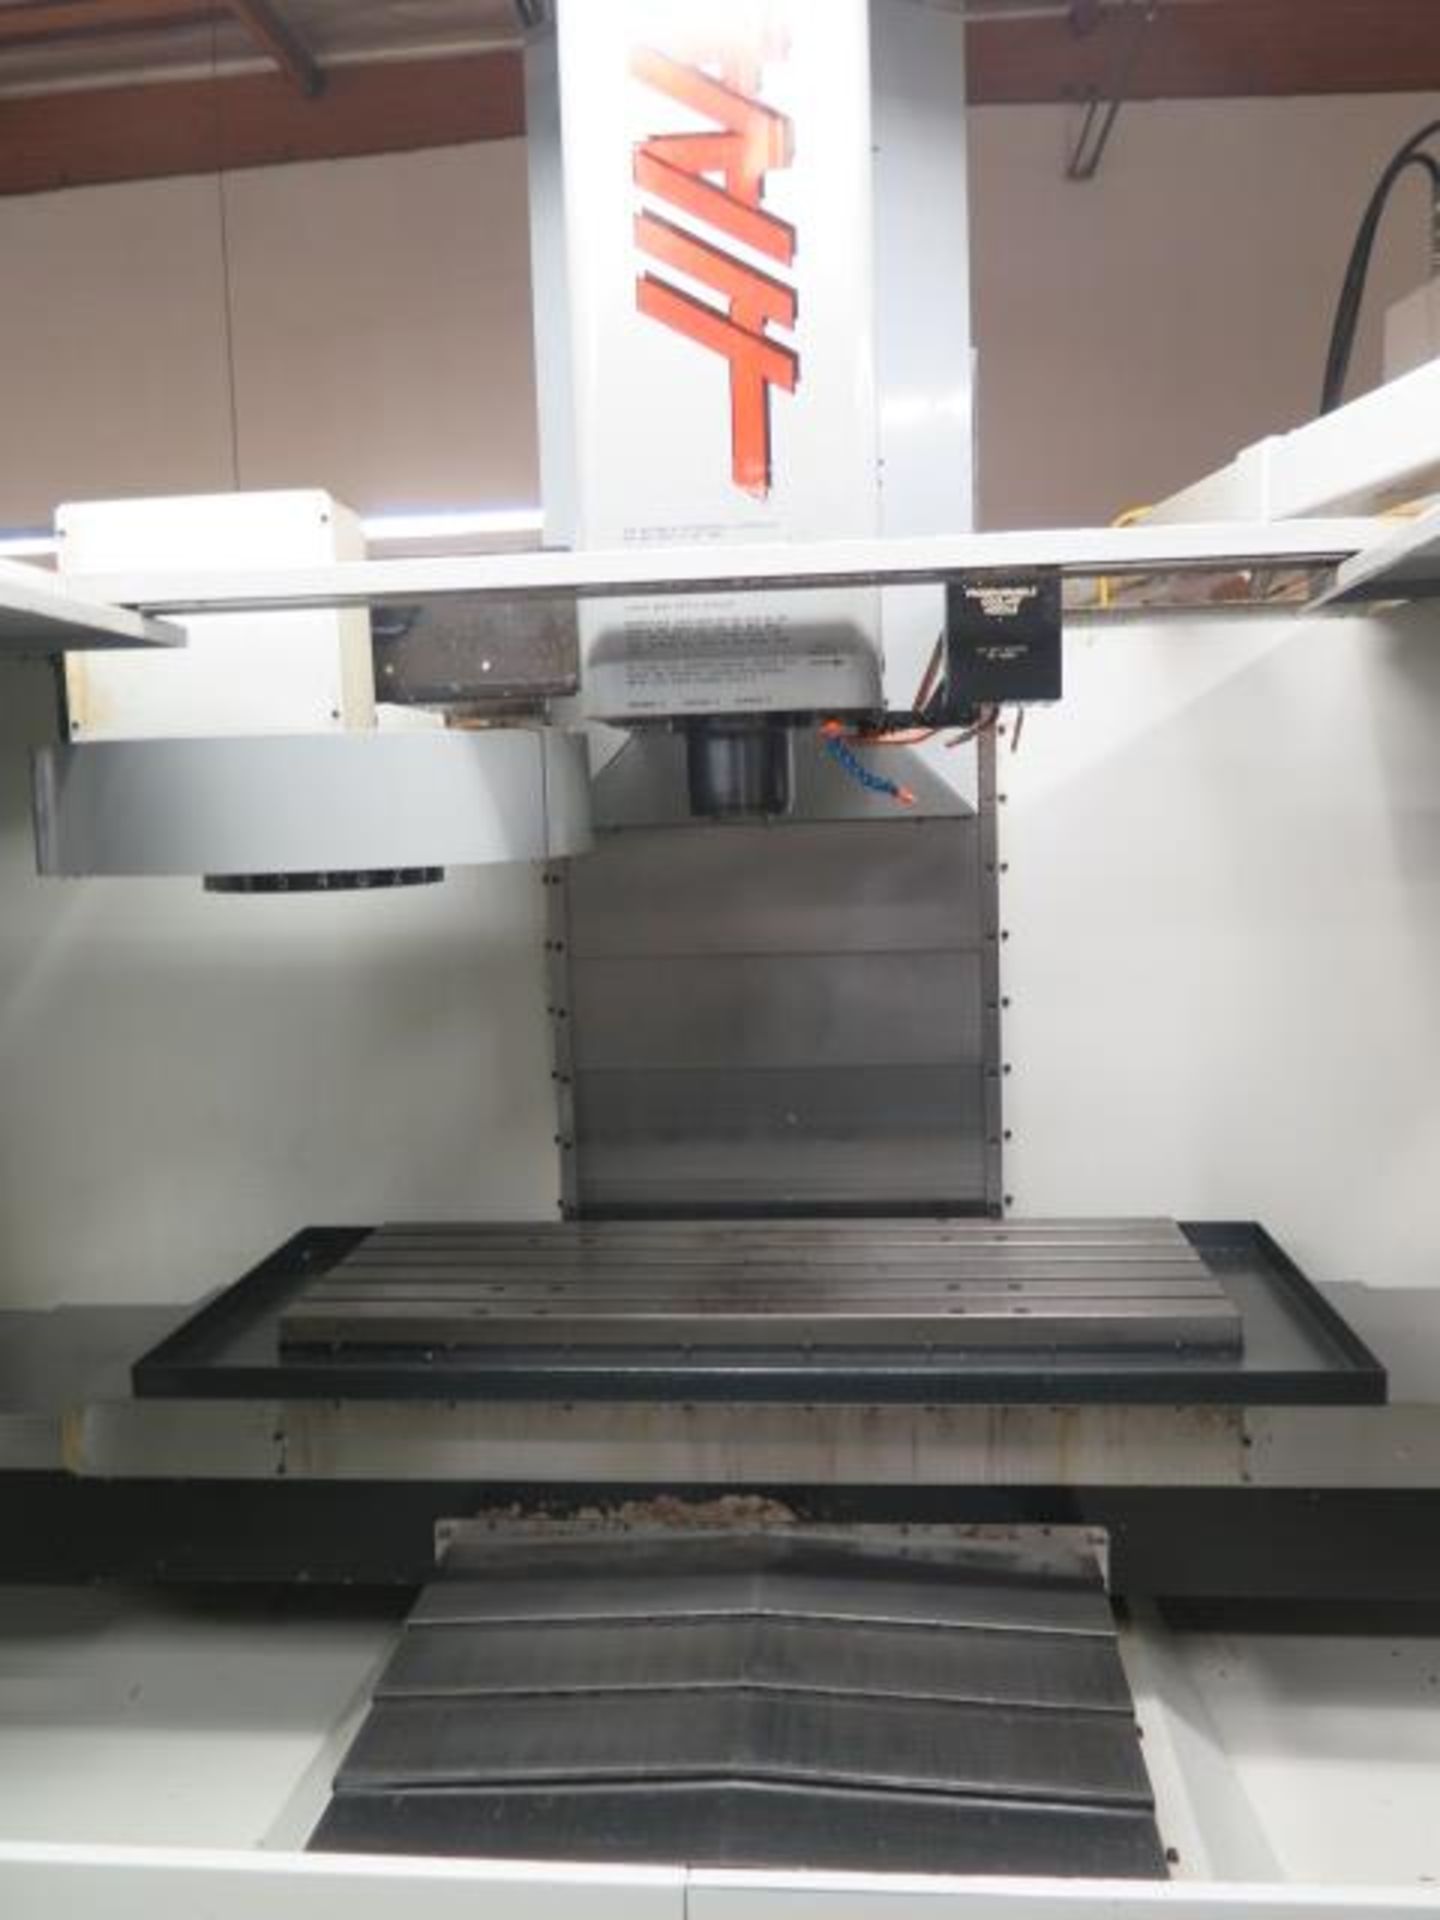 Dec-1997 Haas VF-3 4-Axis Ready CNC VMC s/n 12969 w/ Haas Controls, 20 ATC SOLD AS IS - Image 4 of 16